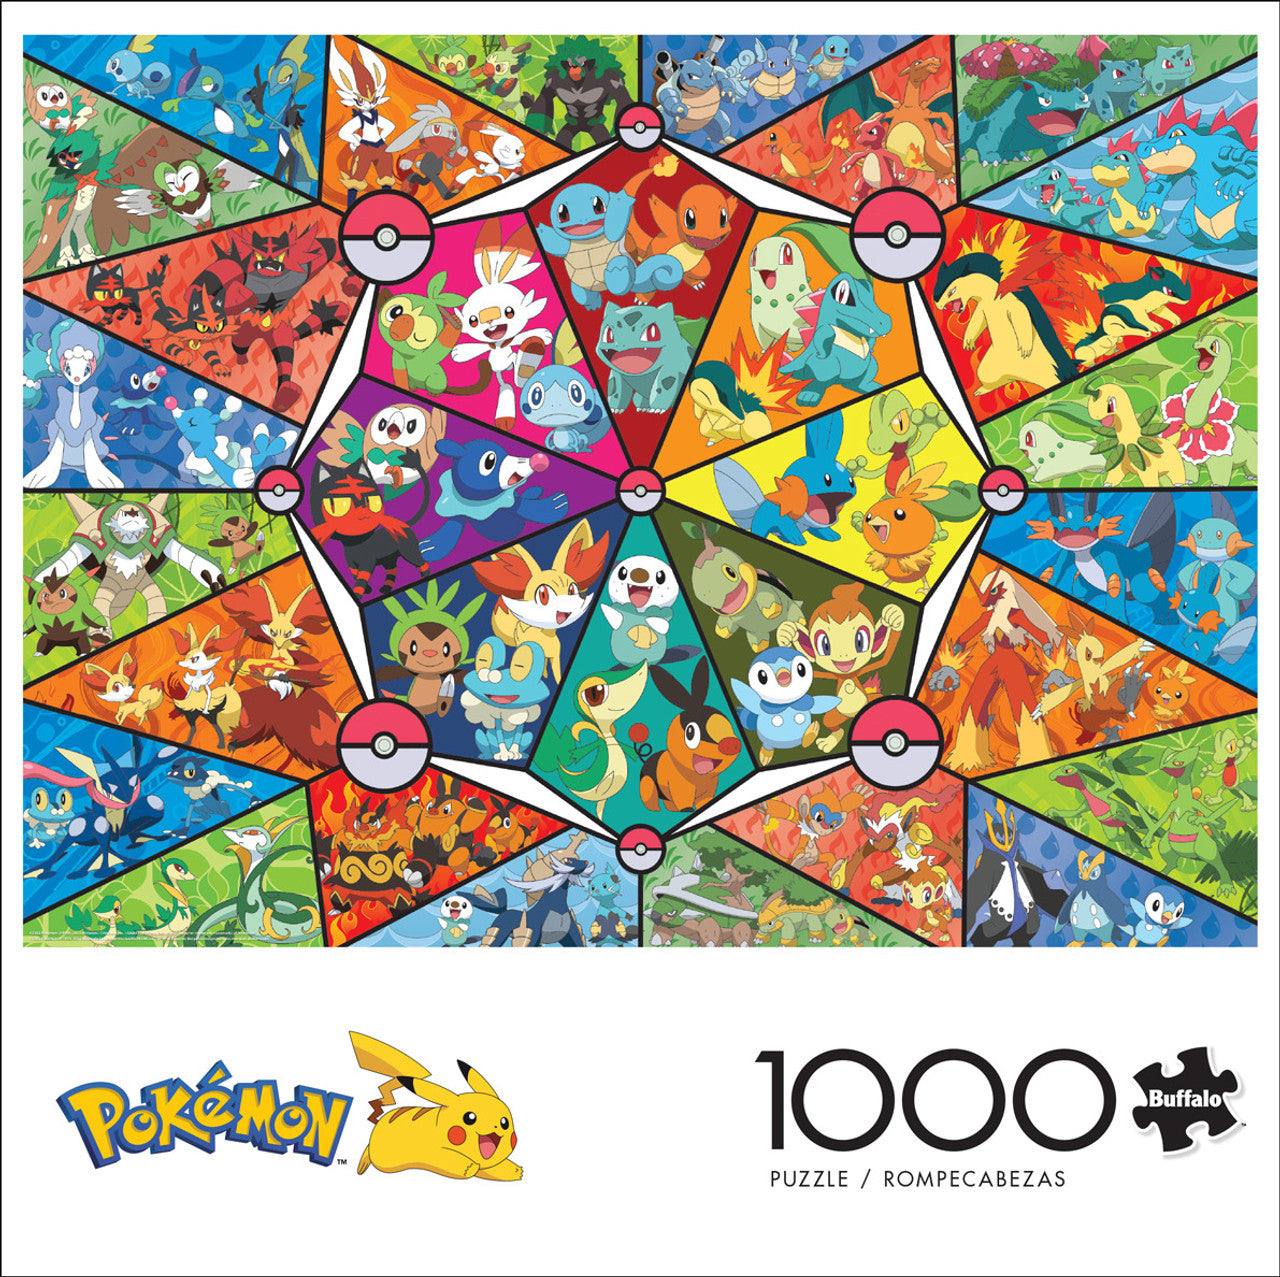  Ravensburger Pokemon 5000 Piece Jigsaw Puzzle for Adults & Kids  Age 12 Years Up : Toys & Games